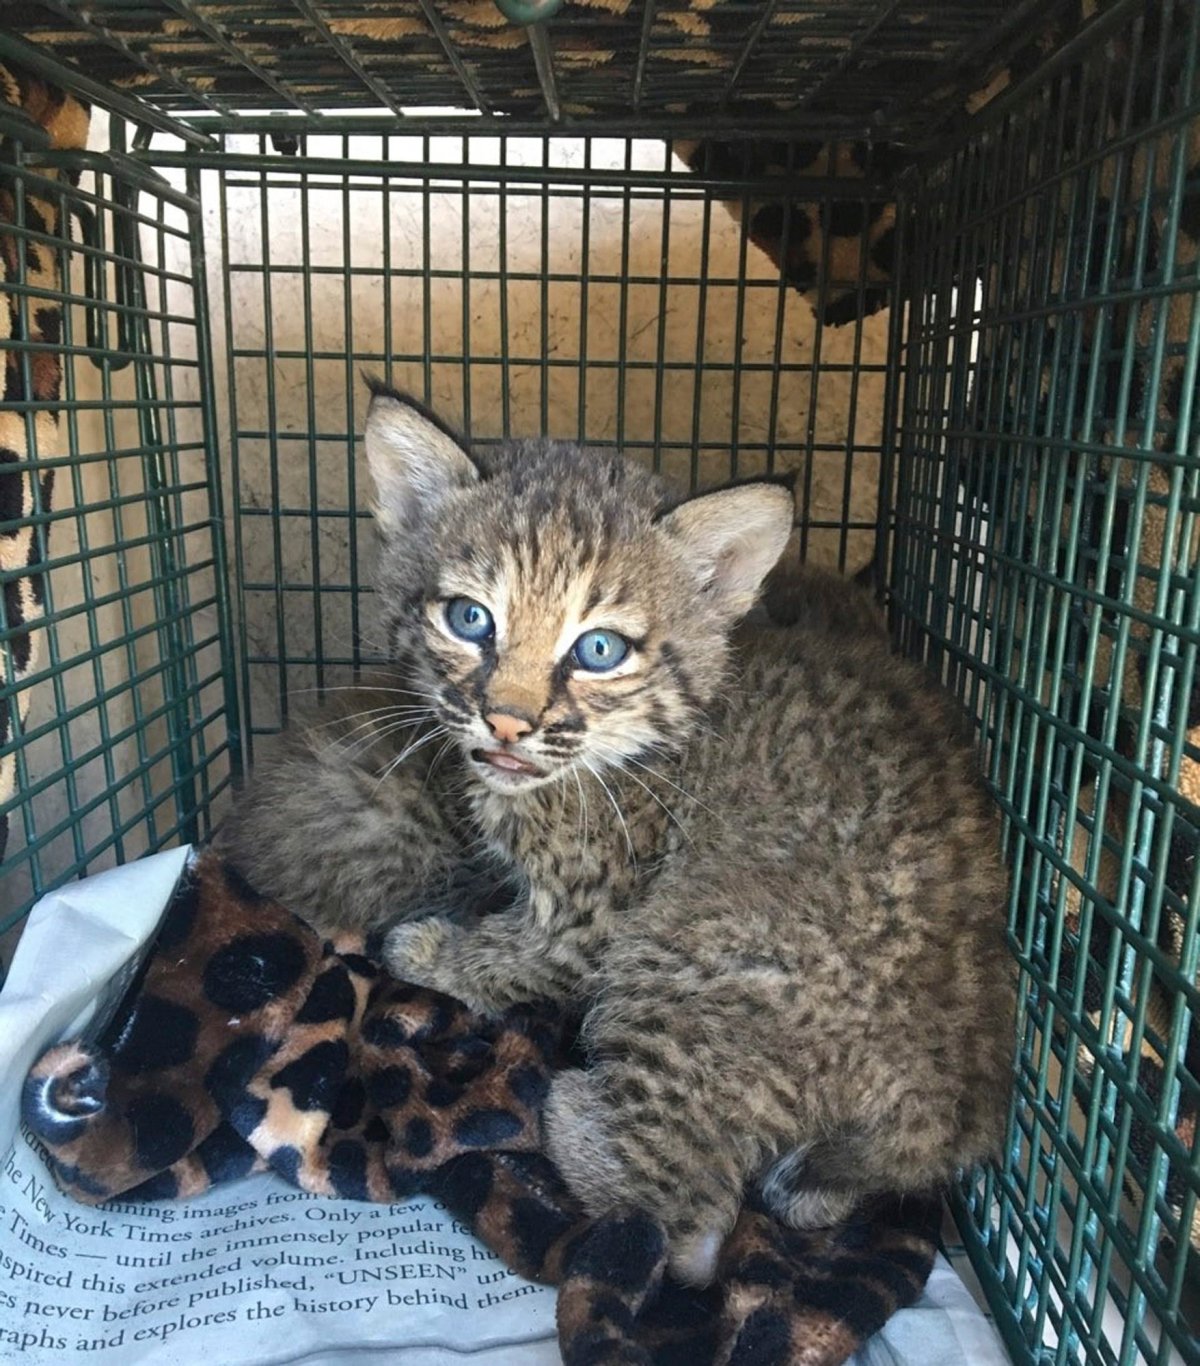 This May 7, 2018 photo provided by the City of San Antonio Animal Care Services Department shows two bobcat cubs.